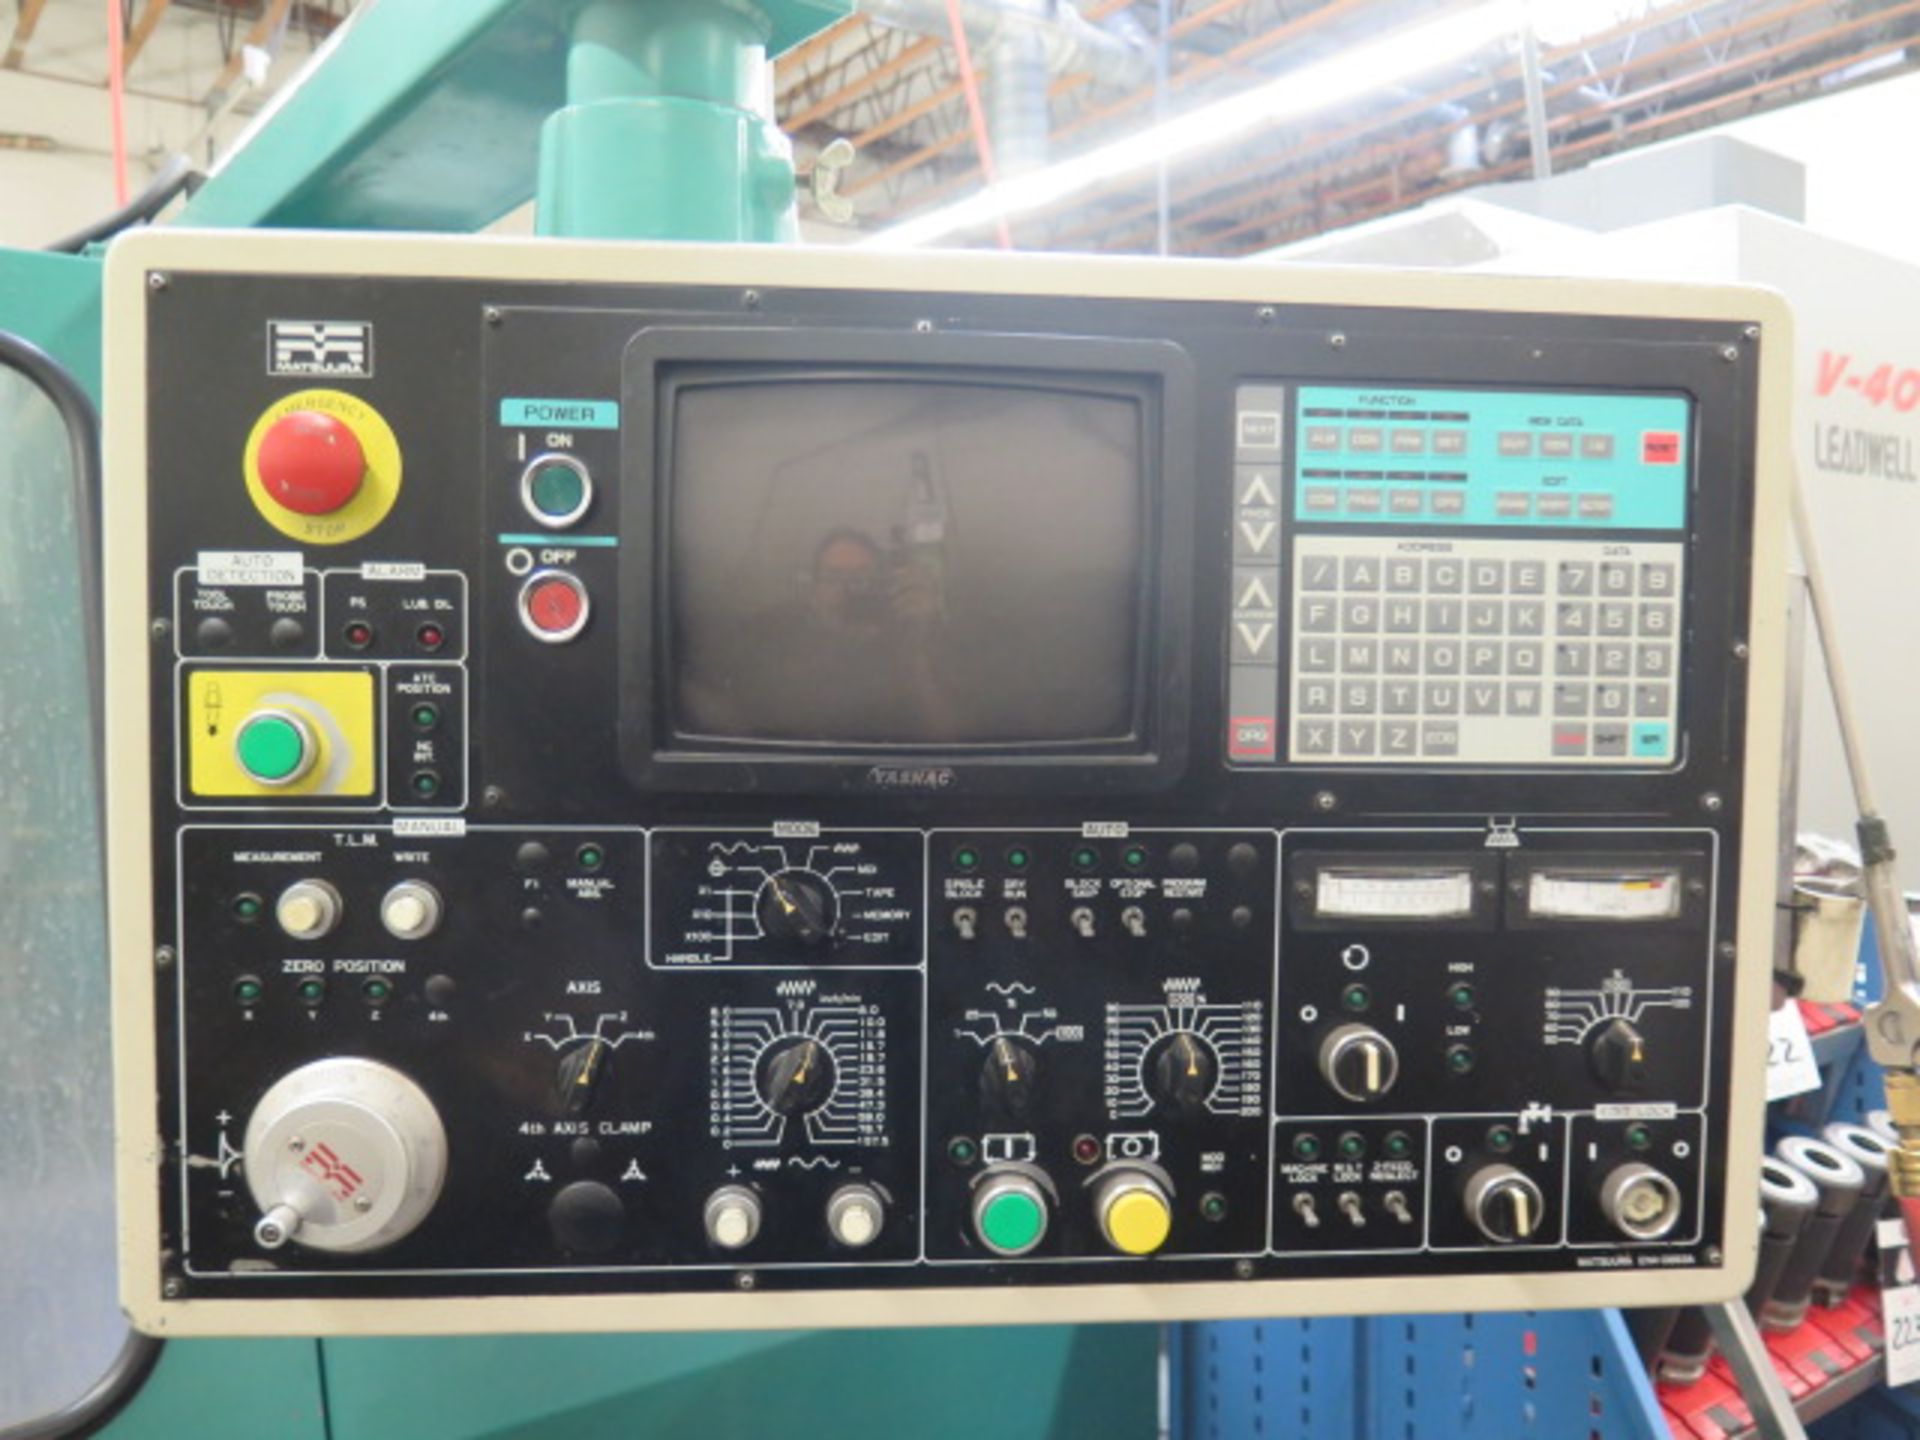 Matsuura MC-600V CNC Vertical Machining Center s/n 890607555 w/ Yasnac Controls, 20 ATC, SOLD AS IS - Image 12 of 14